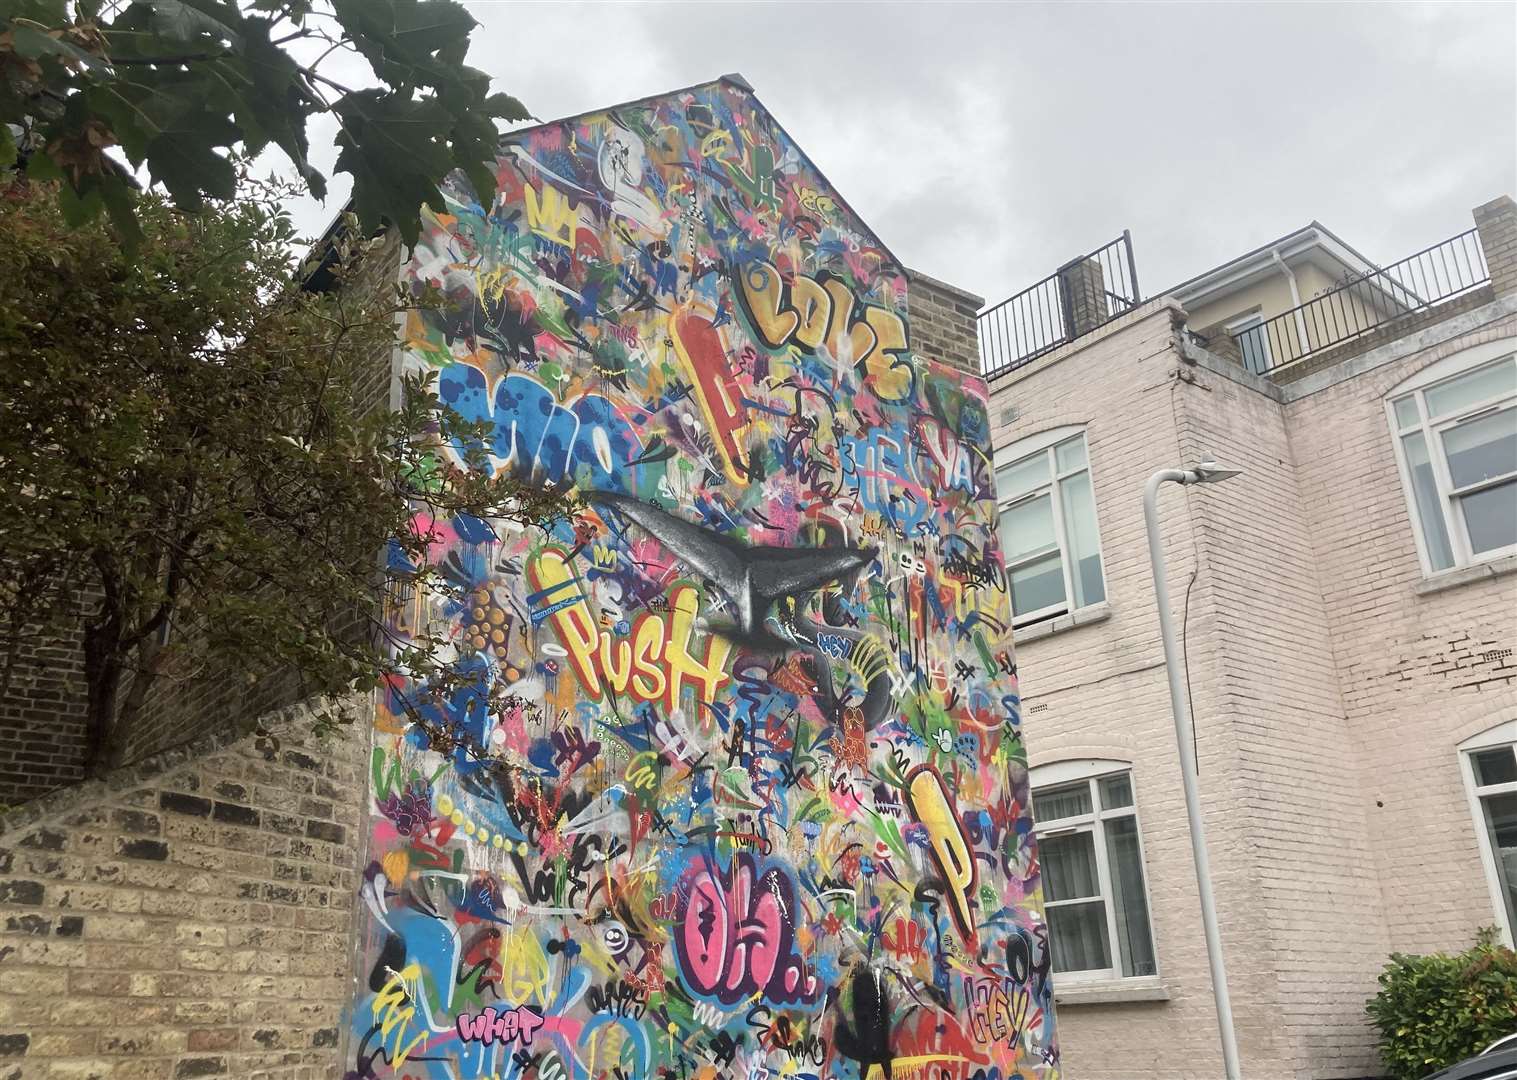 The mural can be found on Caroline Square, Margate. (59762867)